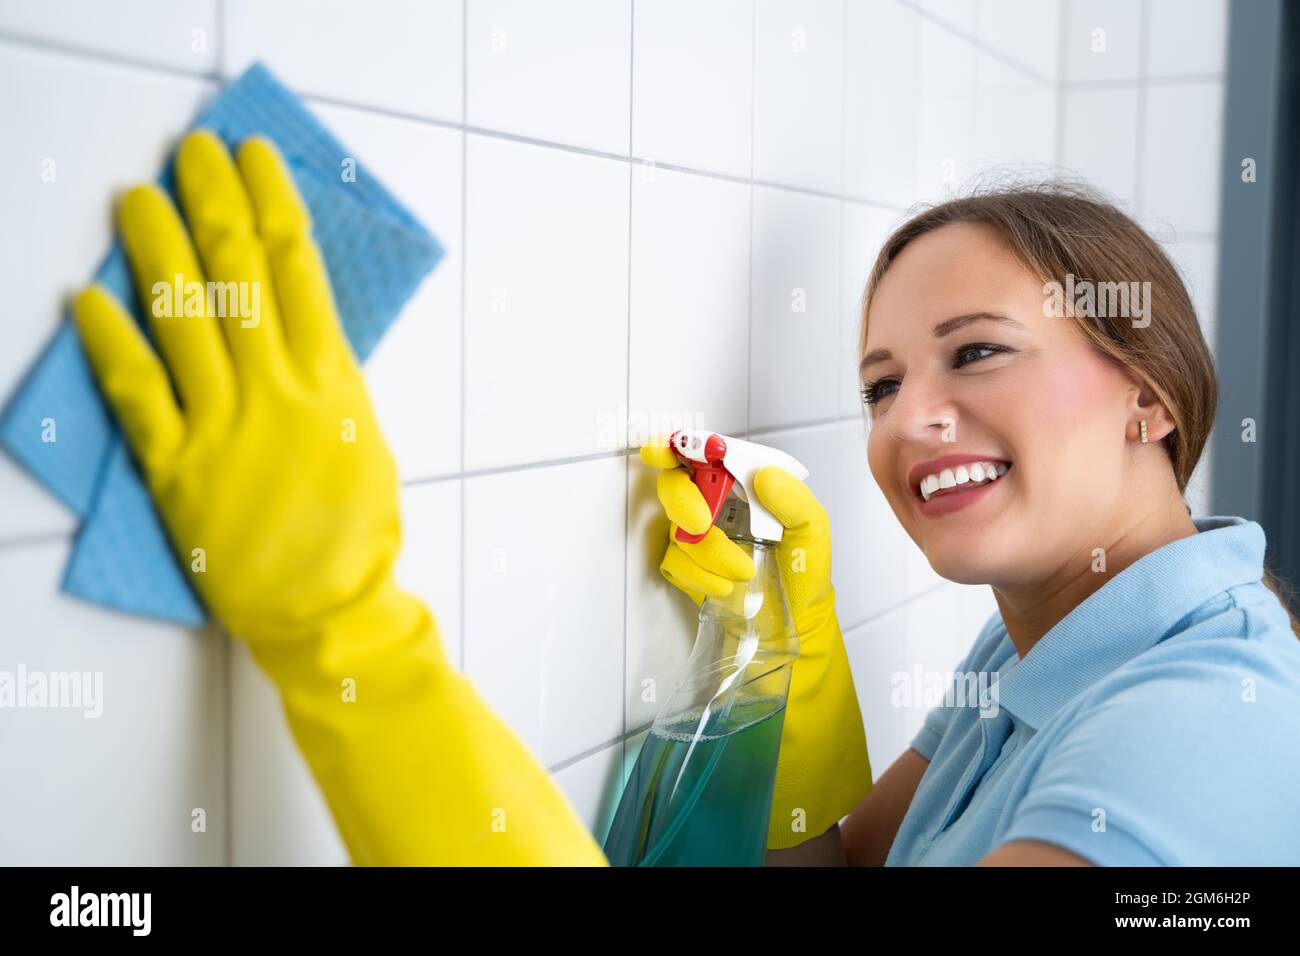 Grout Tile Cleaning. Cleaning Wall With Wipe Stock Photo